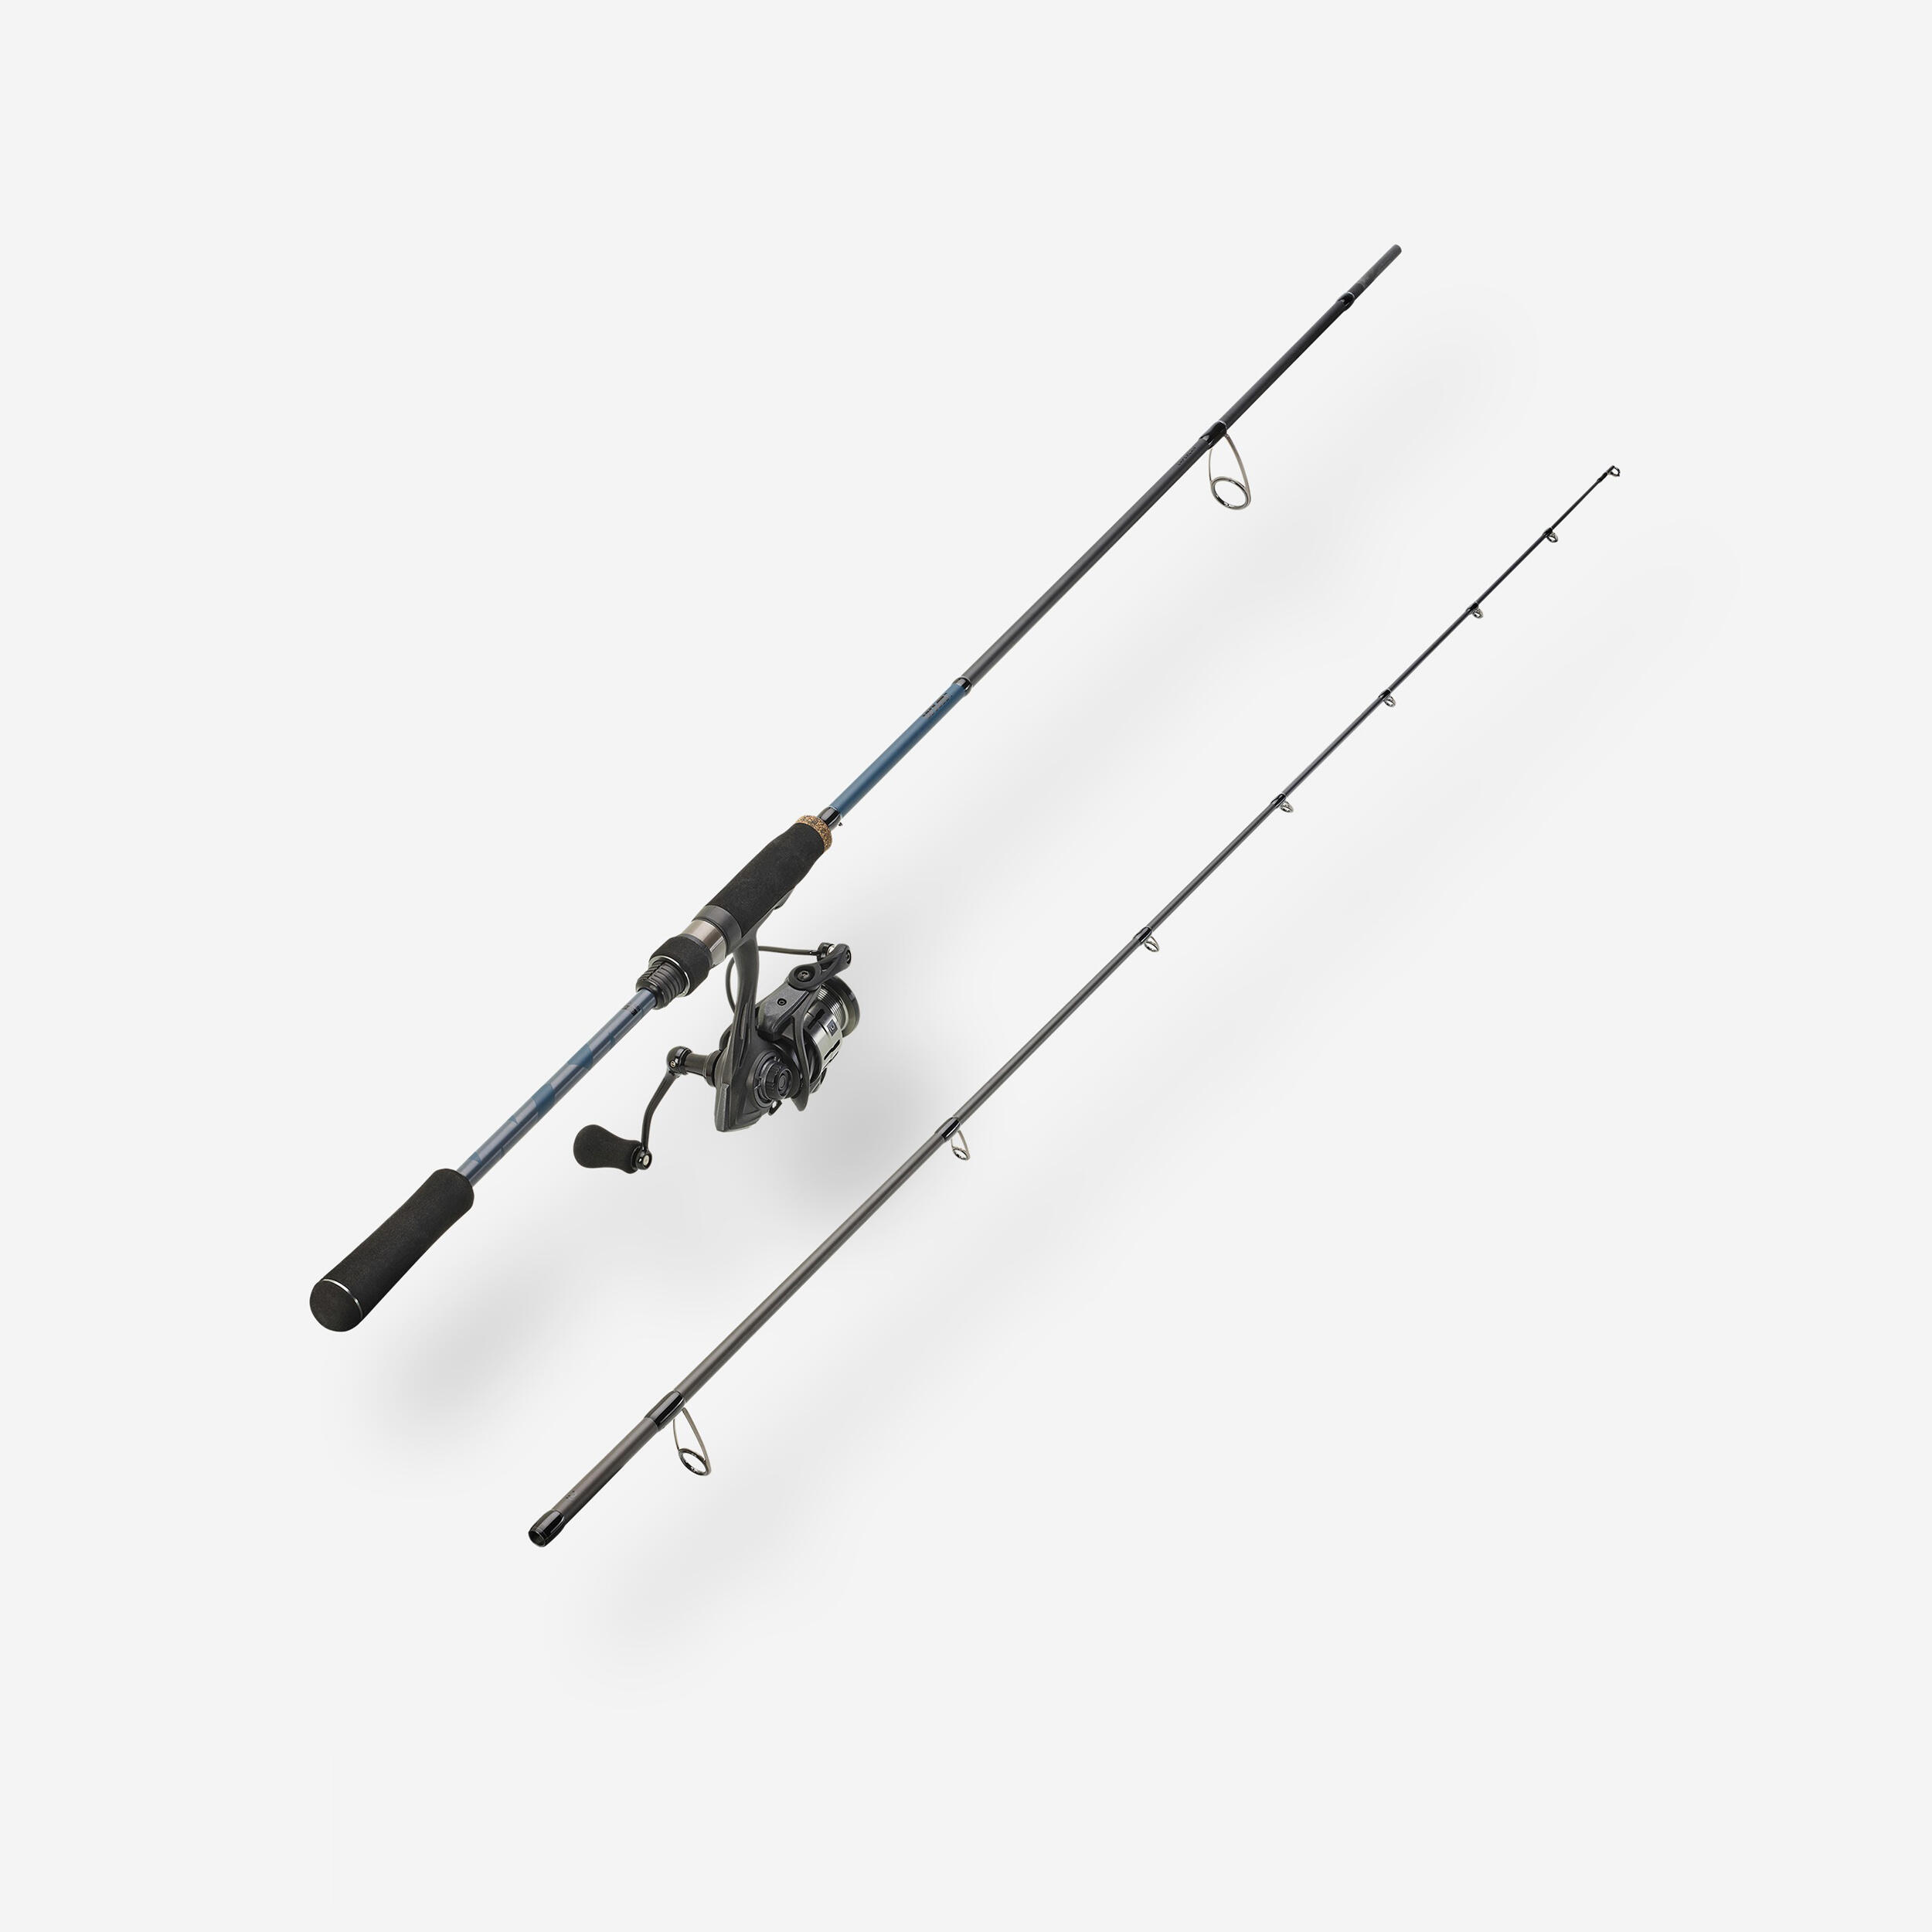 WXM-5 210 MH combo lure fishing rod and reel